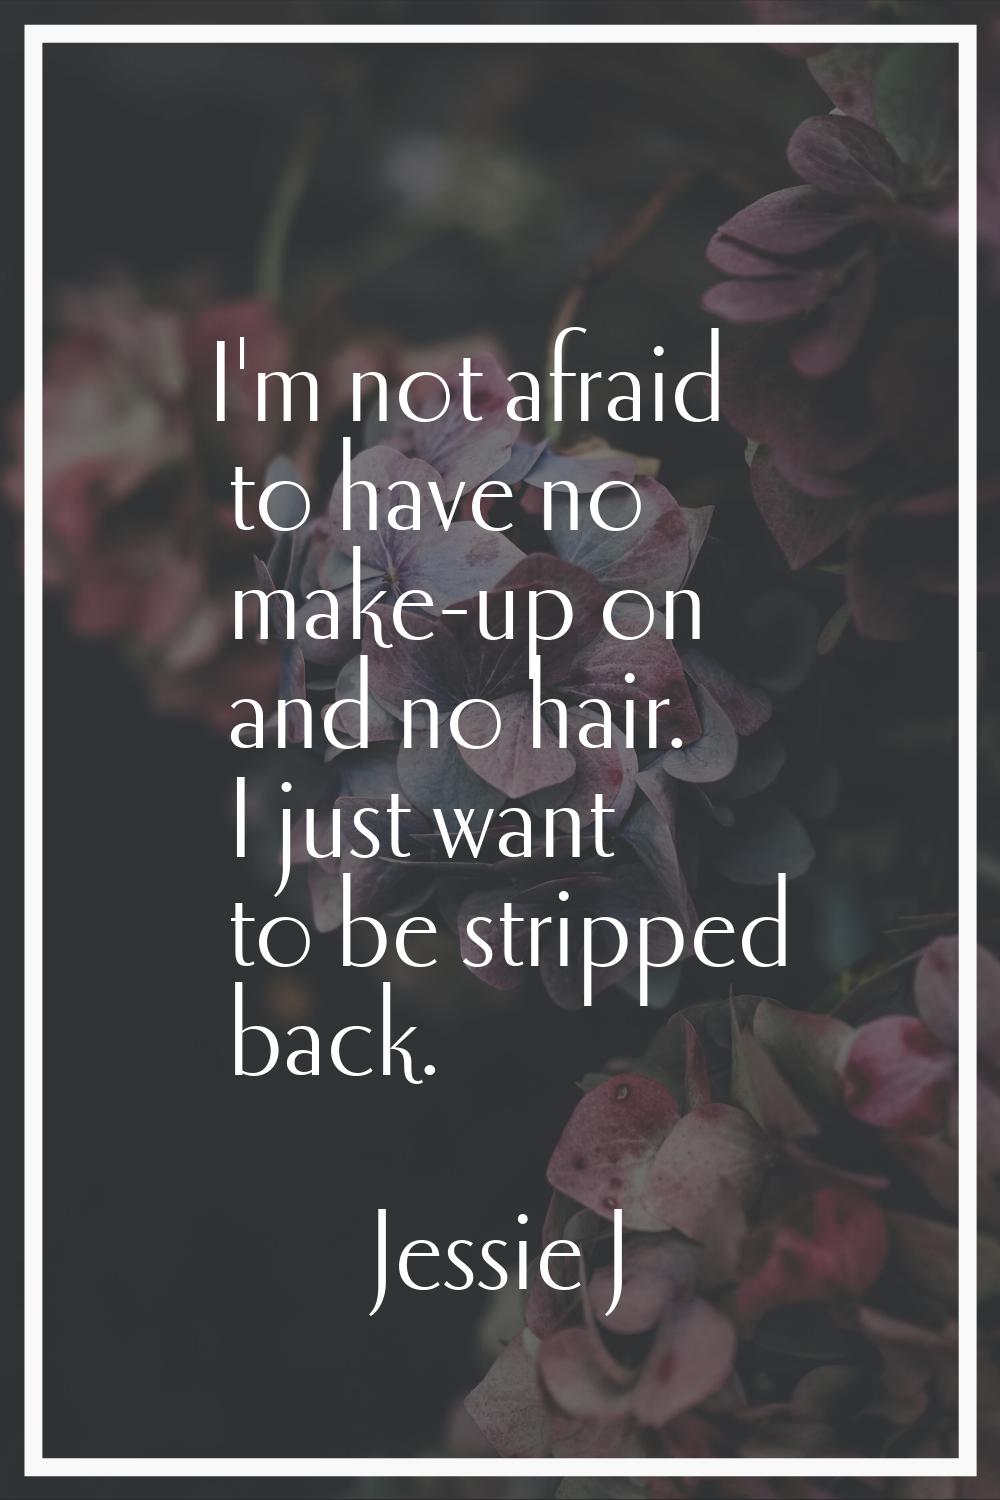 I'm not afraid to have no make-up on and no hair. I just want to be stripped back.